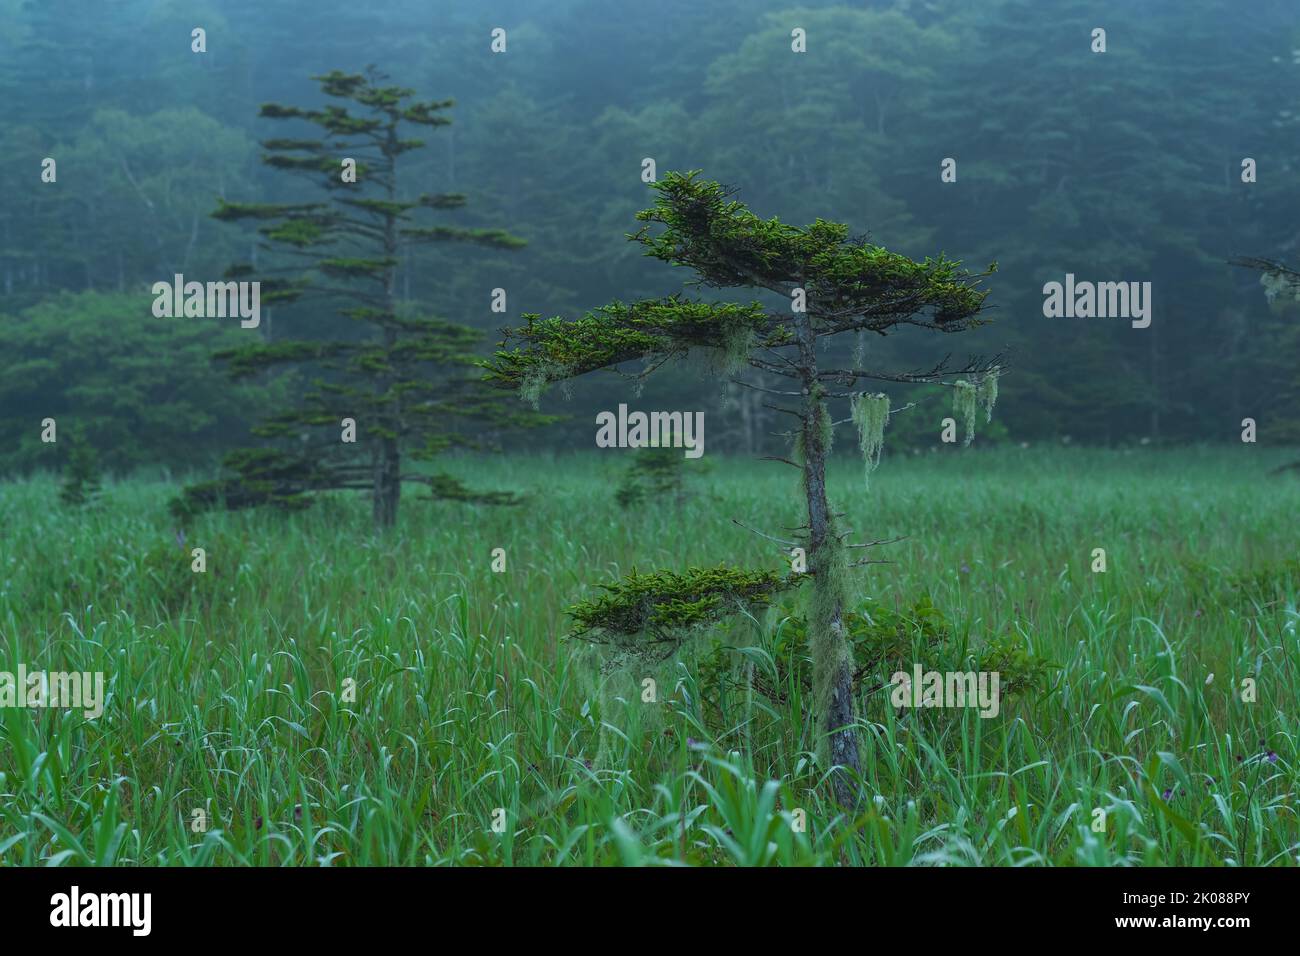 foggy morning landscape with beautifully stunted pines Stock Photo